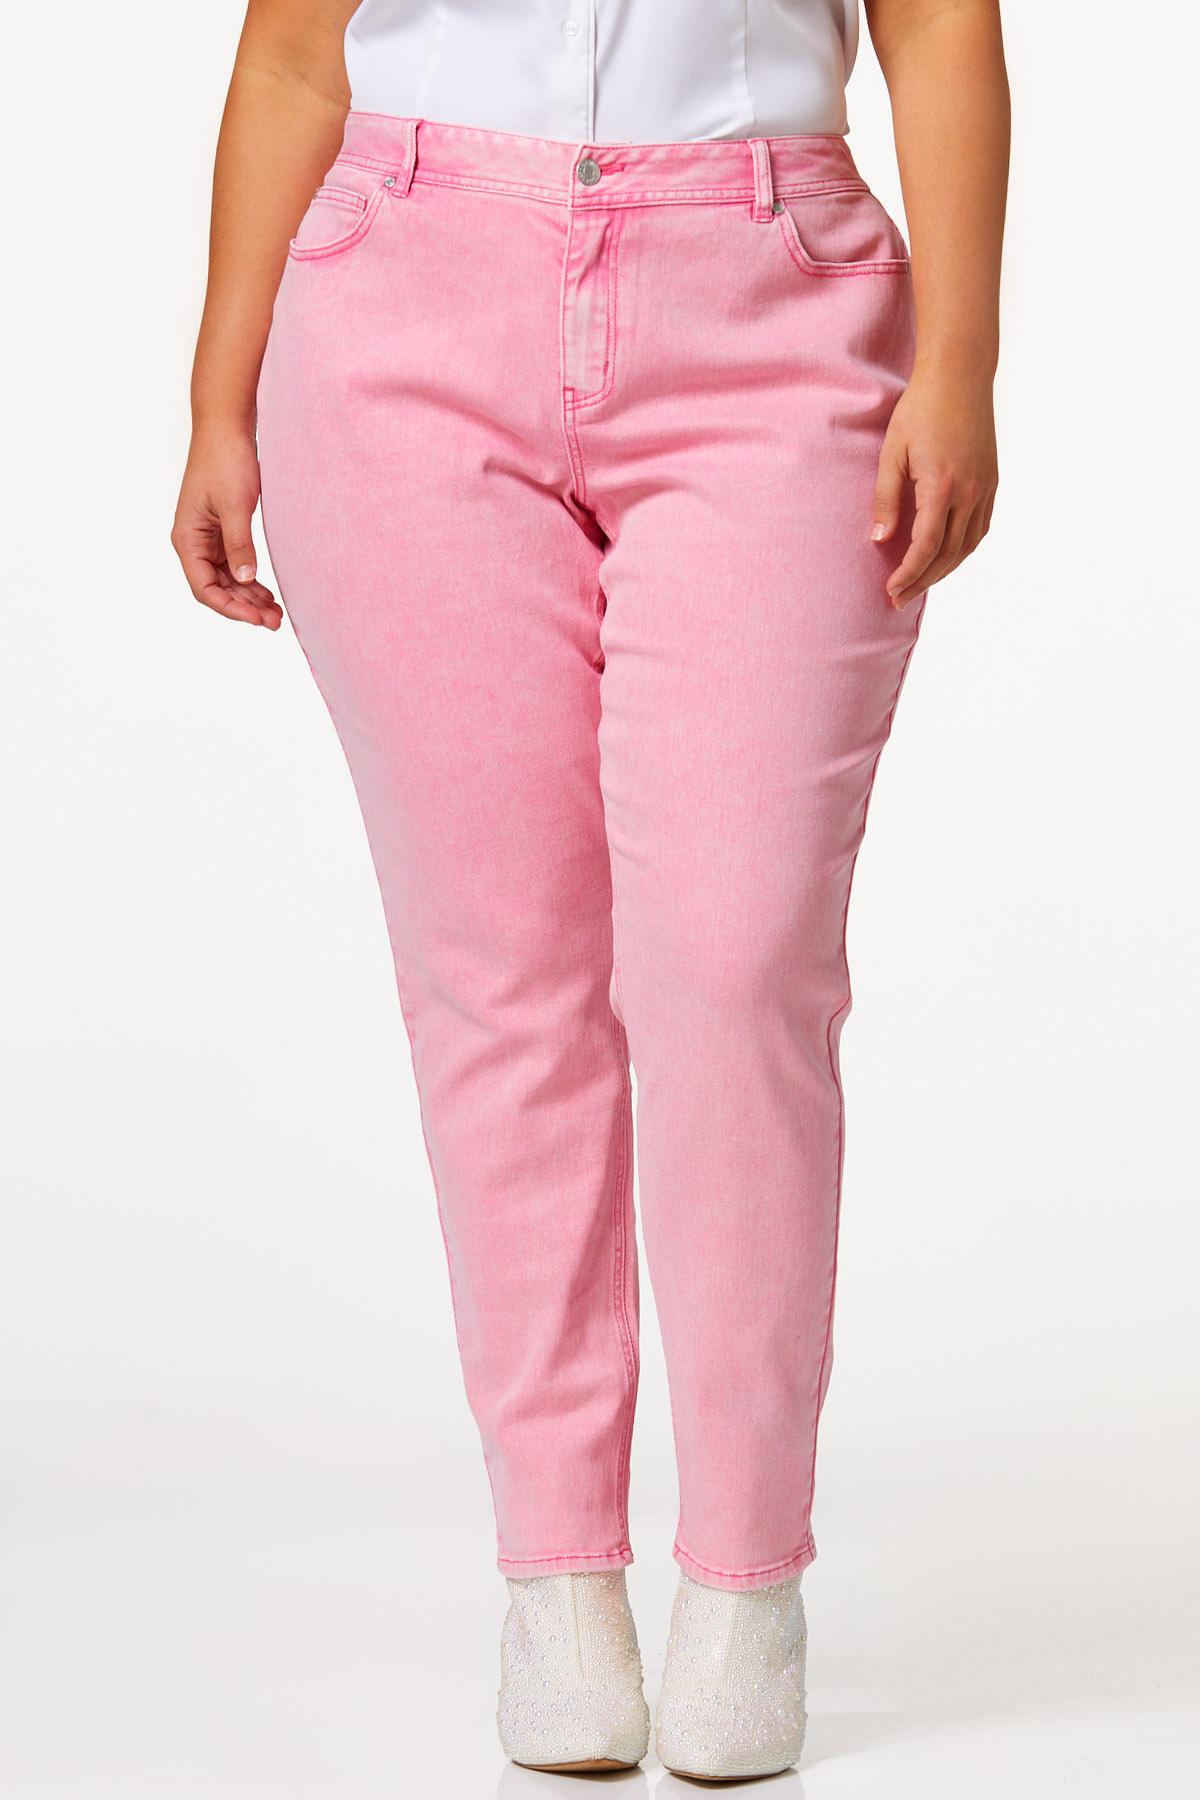 Cato Fashions  Cato Plus Size Pink Skinny Jeans